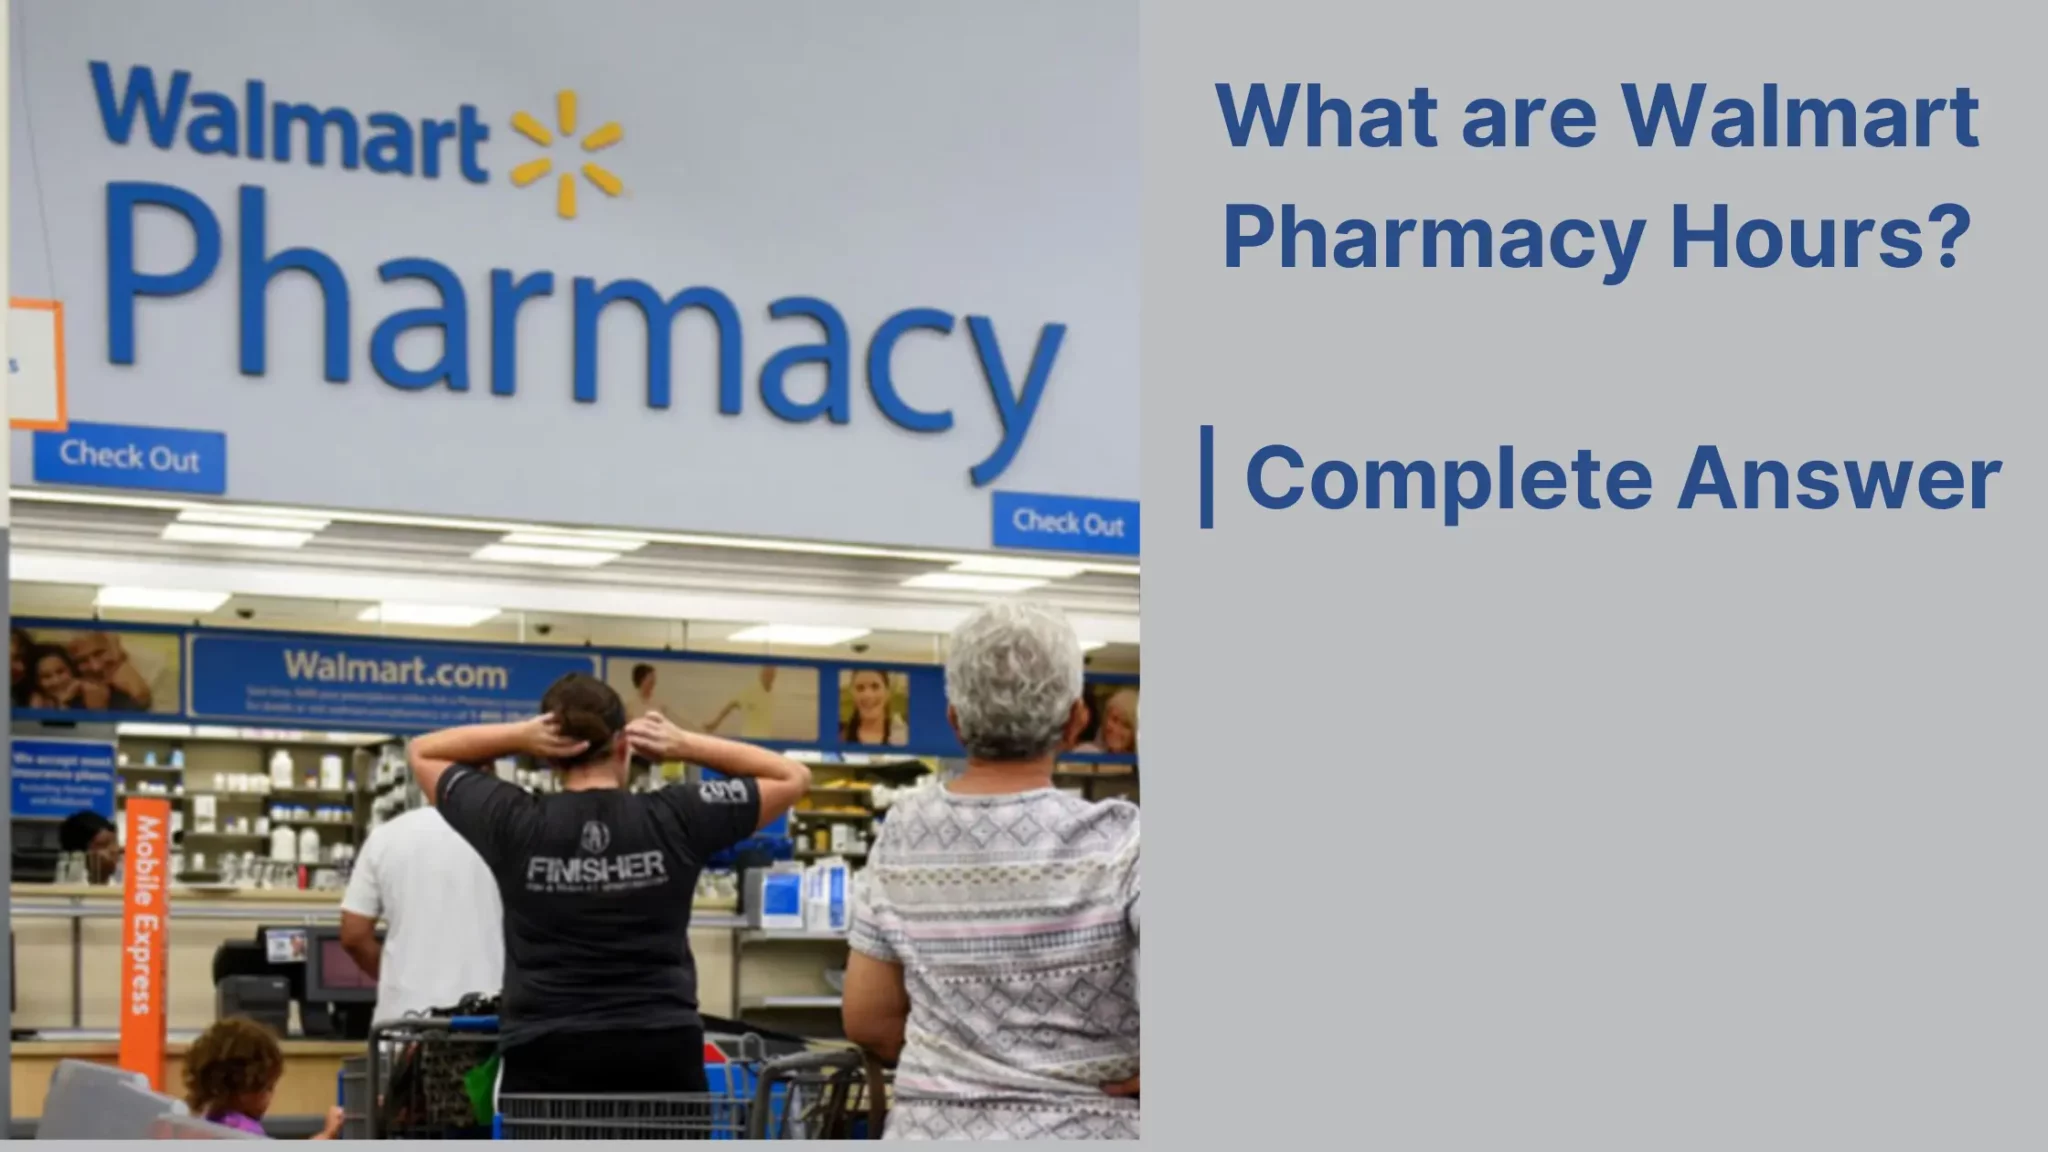 What are Walmart Pharmacy Hours?